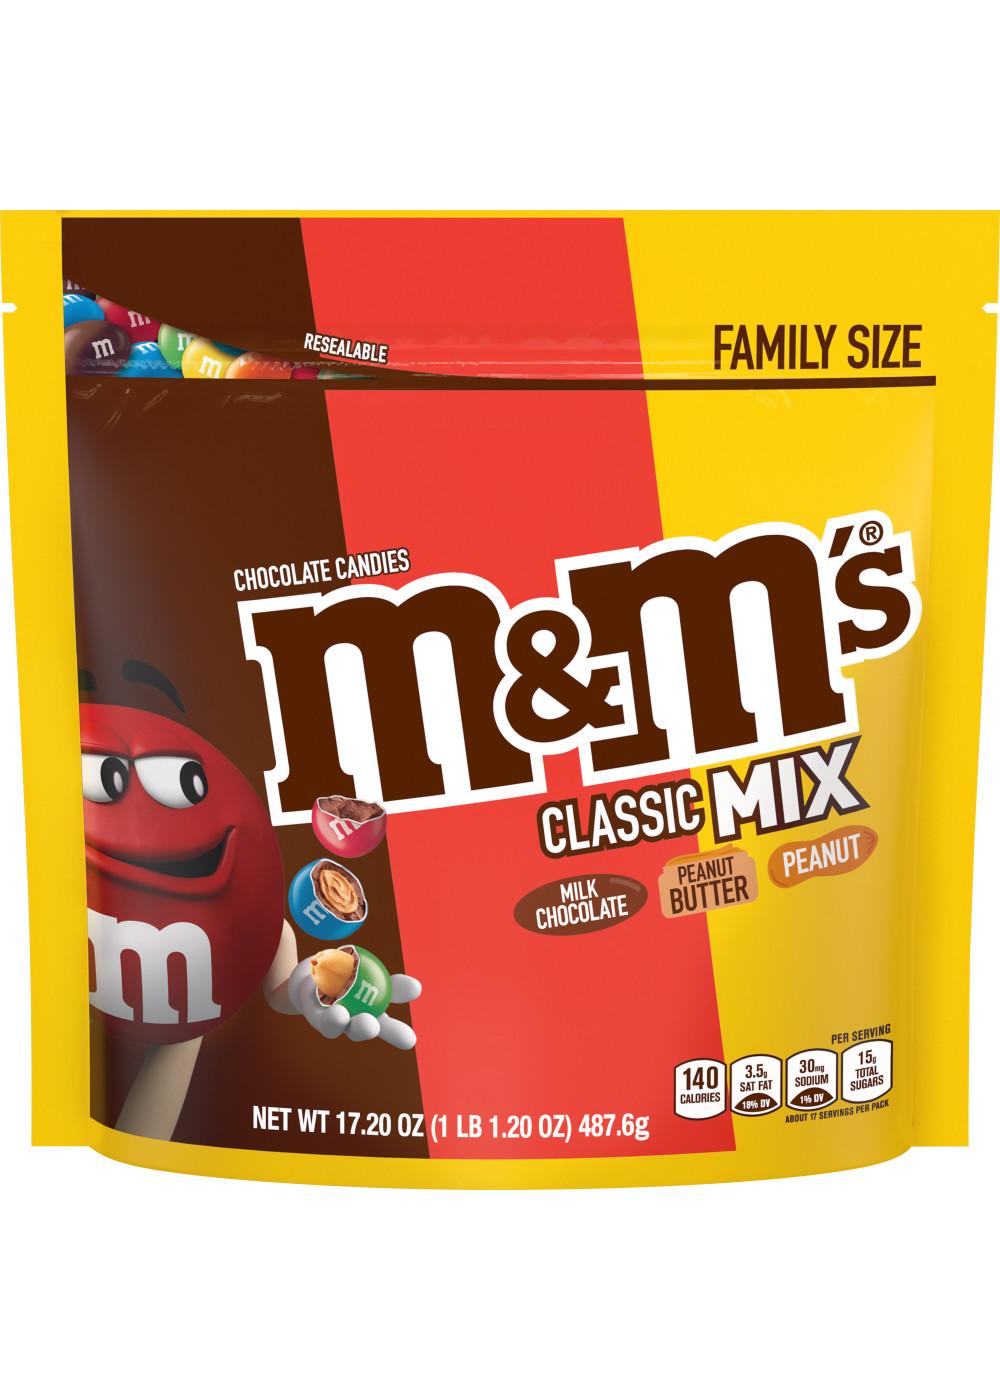 M&M'S Classic Mix Chocolate Candy - Family Size; image 1 of 7